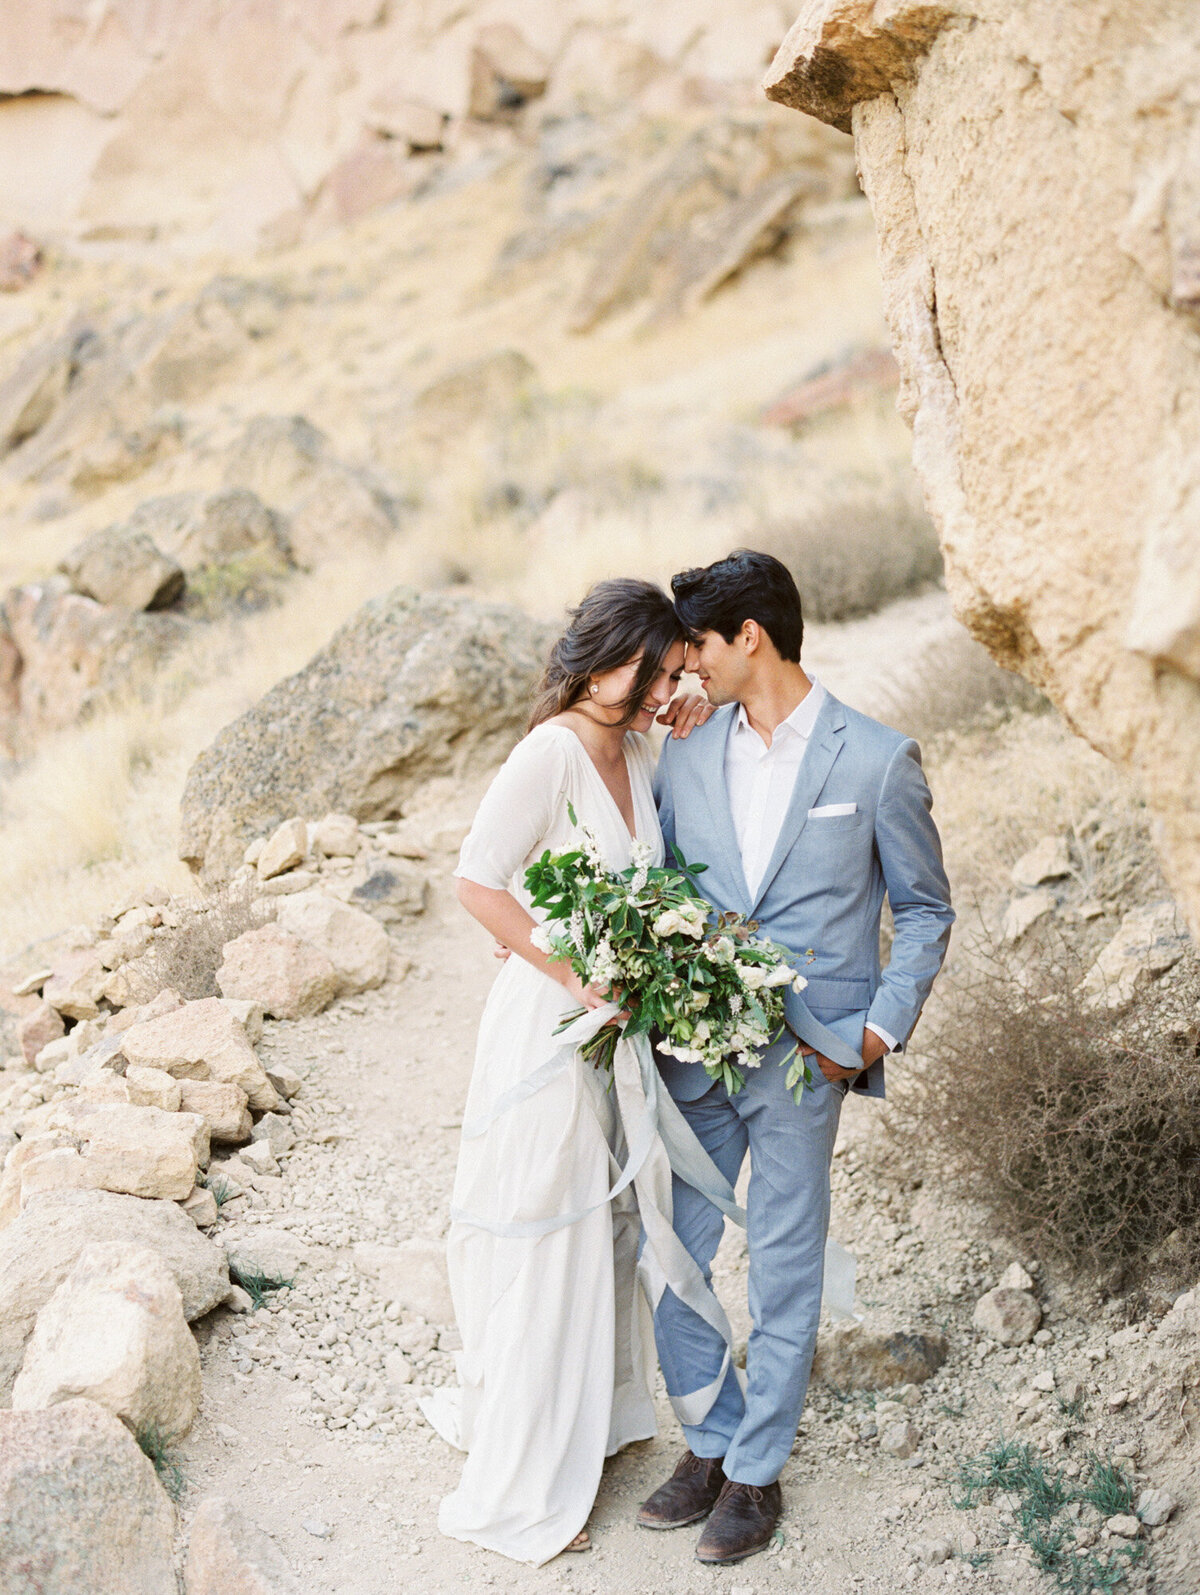 Bridegroom in light blue suit whispers to his newly married wife at a rocky backdrop.